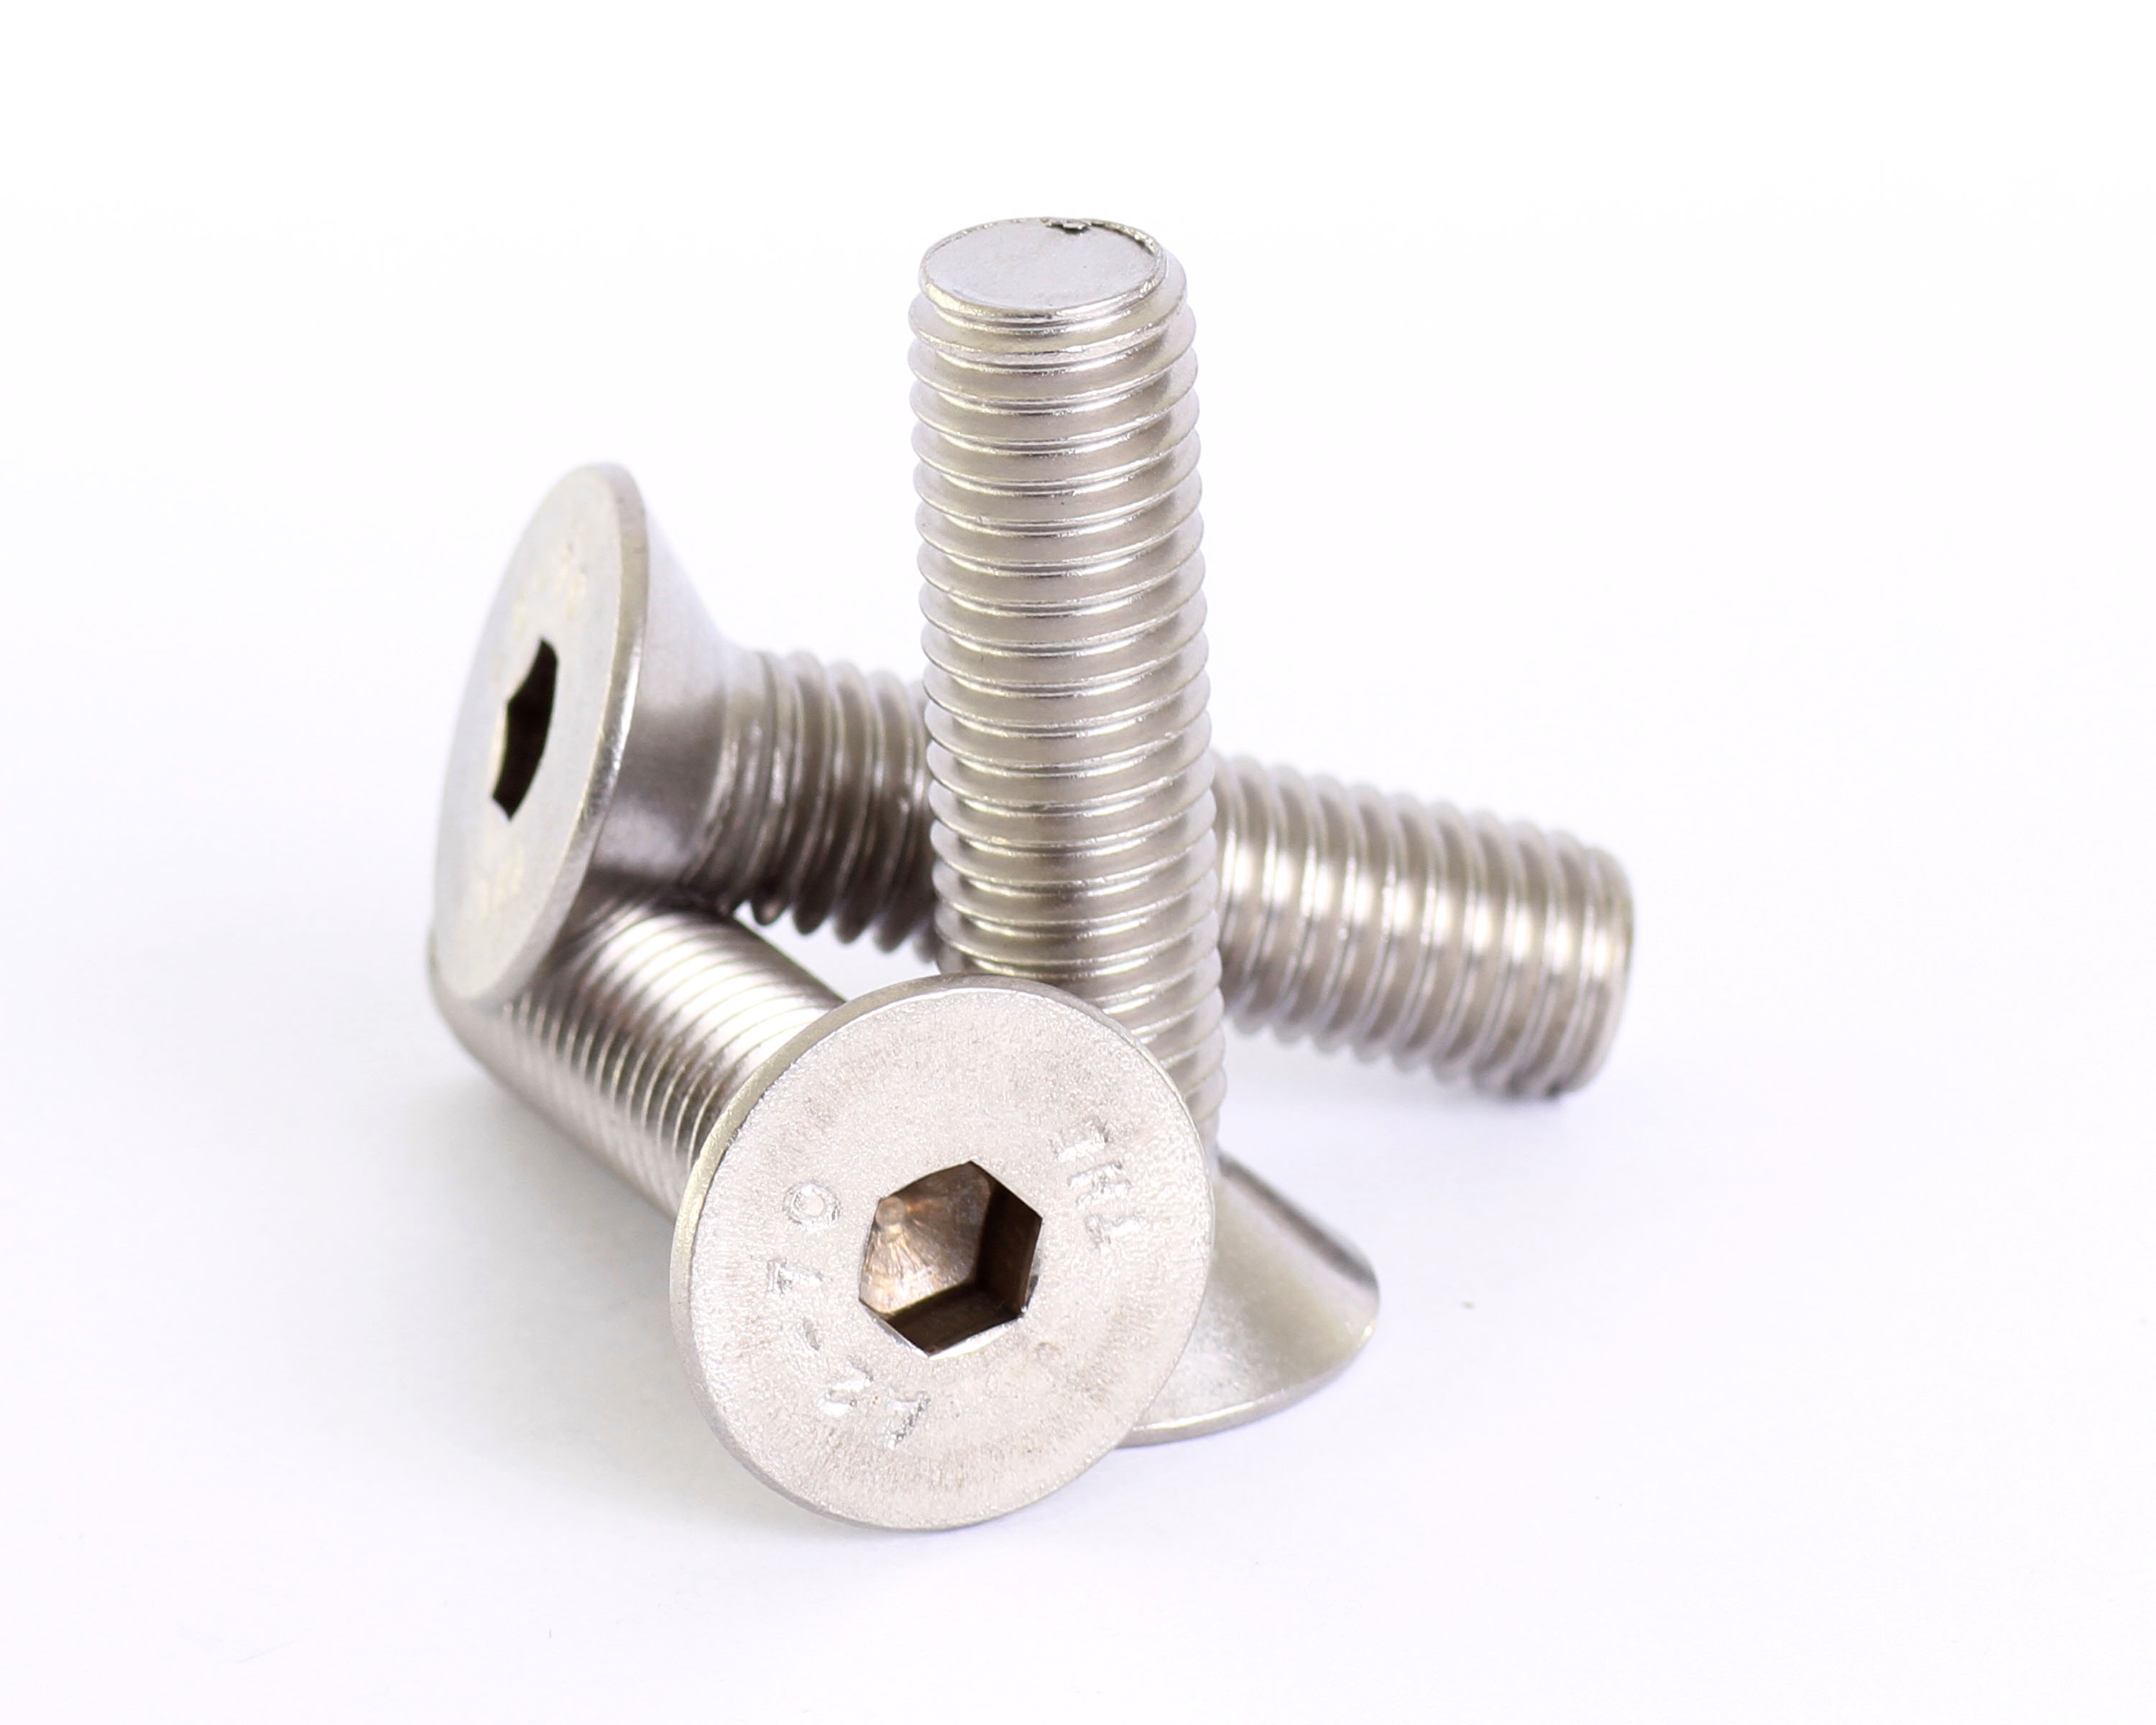 3mm x 16mm Long Slotted Screws Plus M3 Nuts Pack x 10 FREE UK POSTAGE